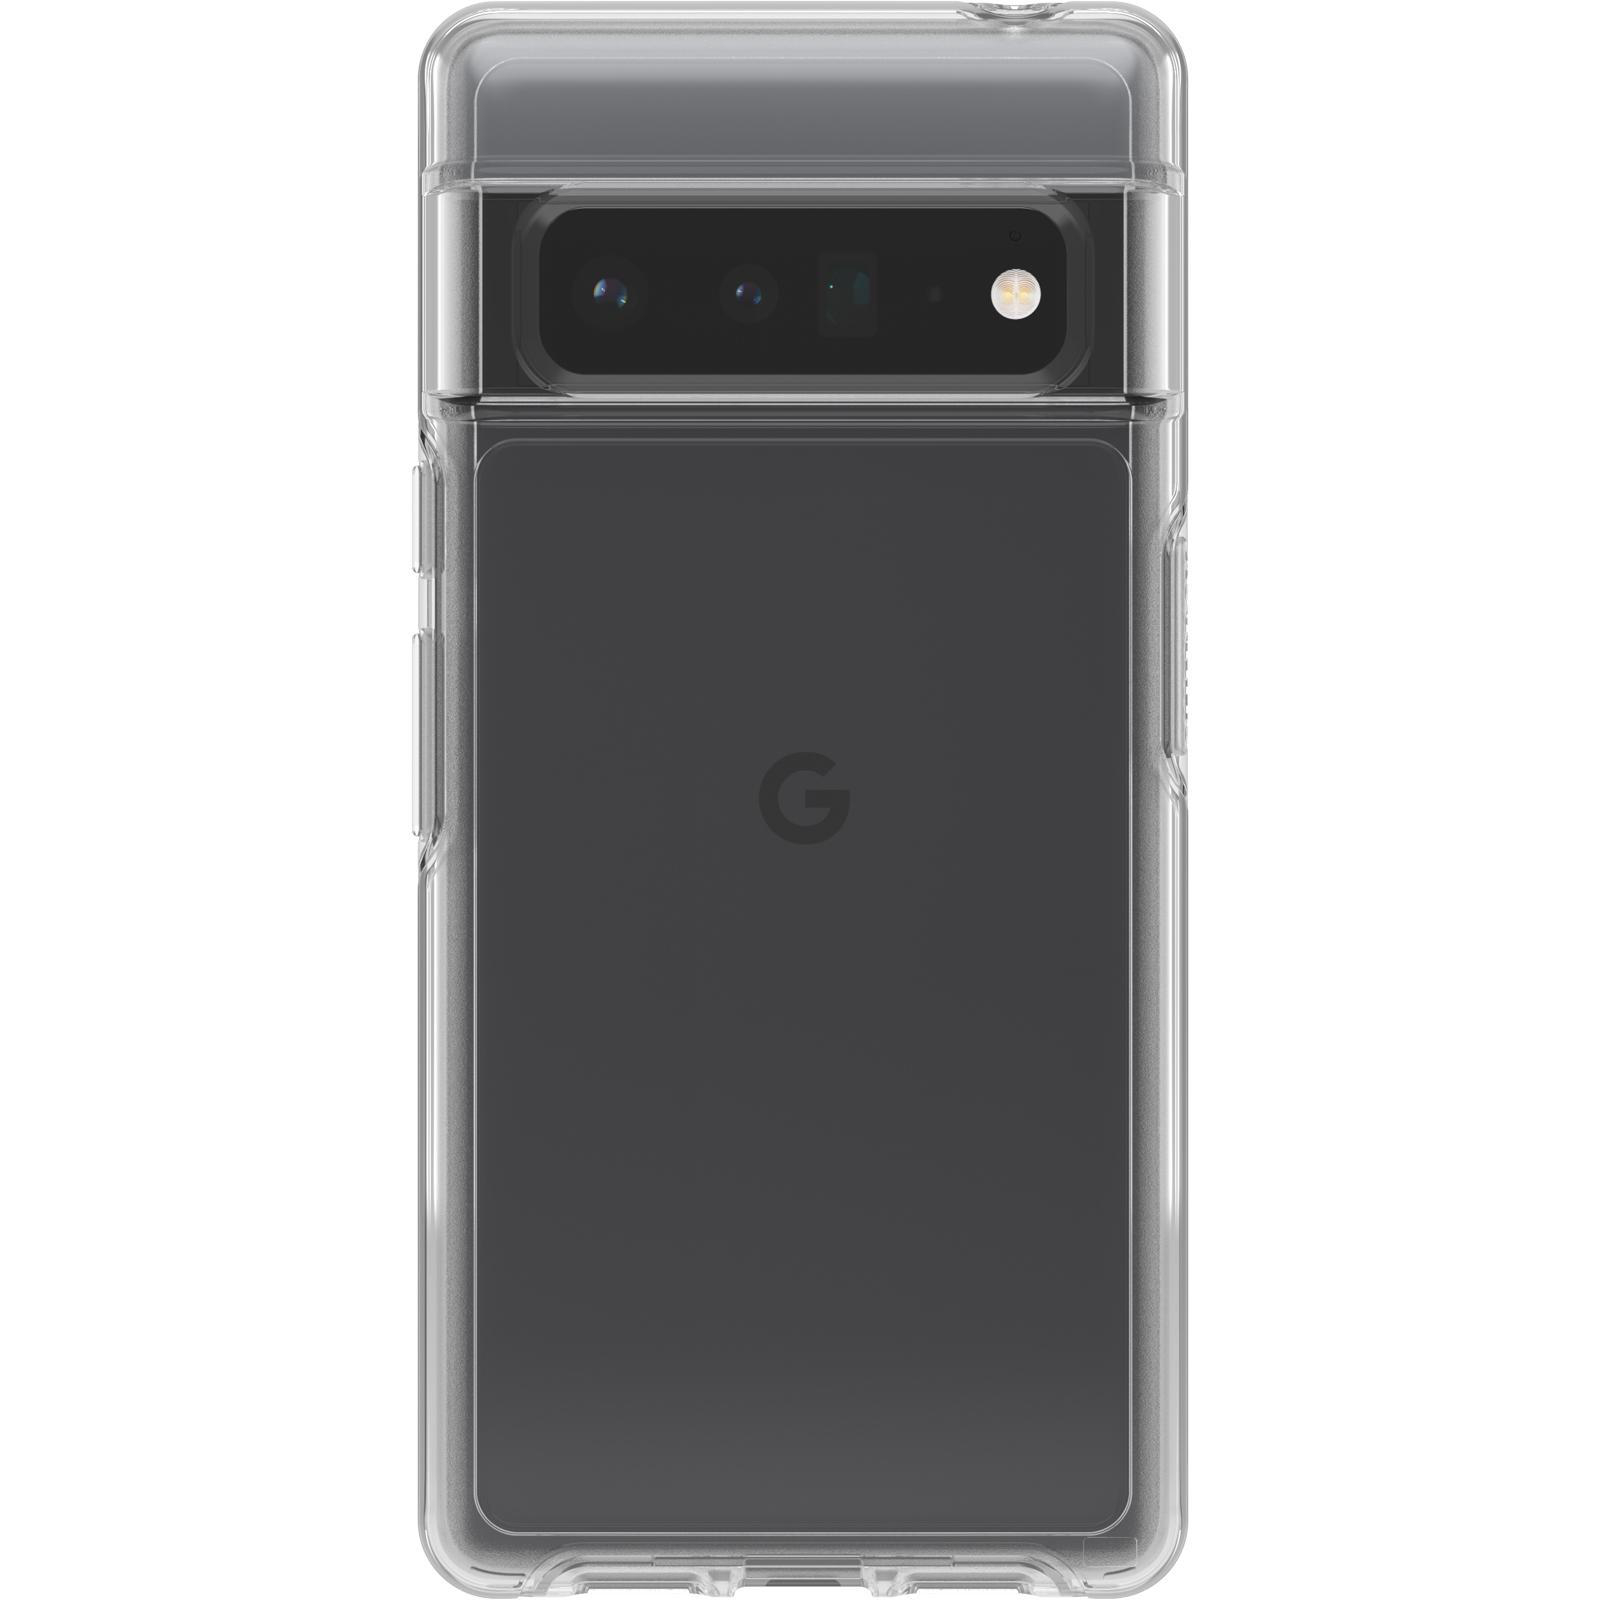 Symmetry Backcover, Pixel 6 Pro, Google, Series, Clear OTTERBOX